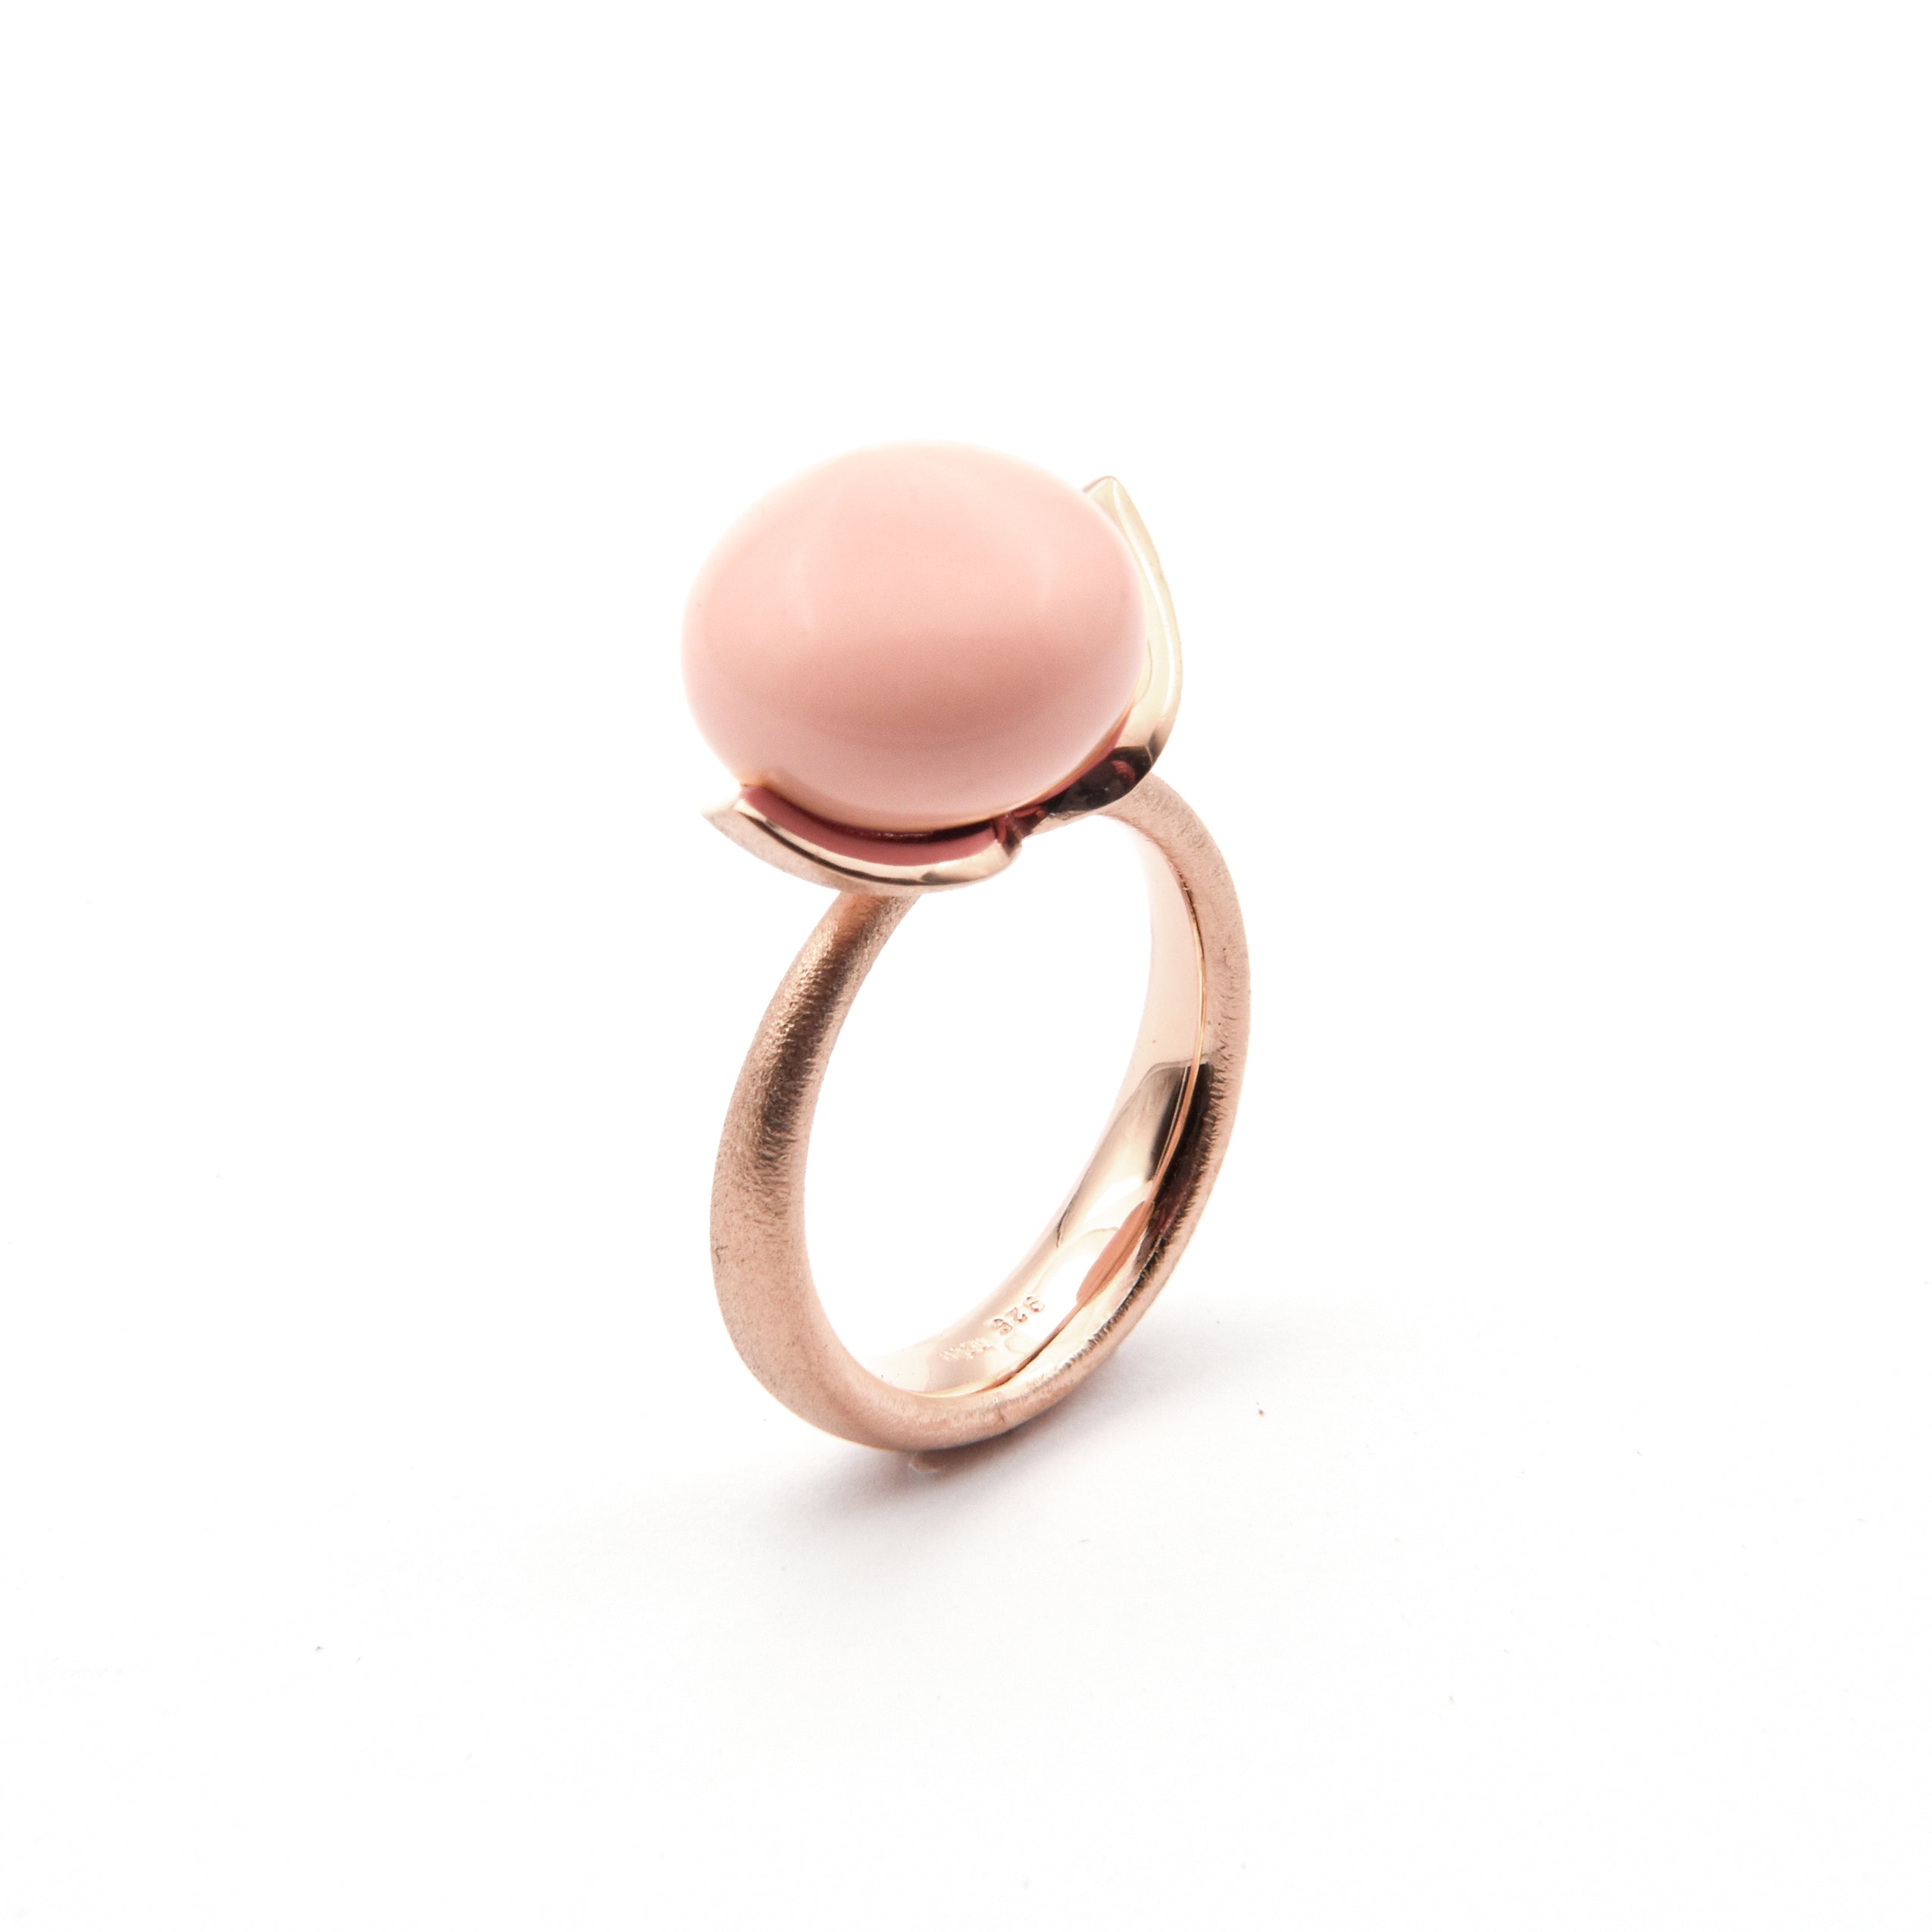 Dolce ring "big" with coral angel skin rec. 925/-